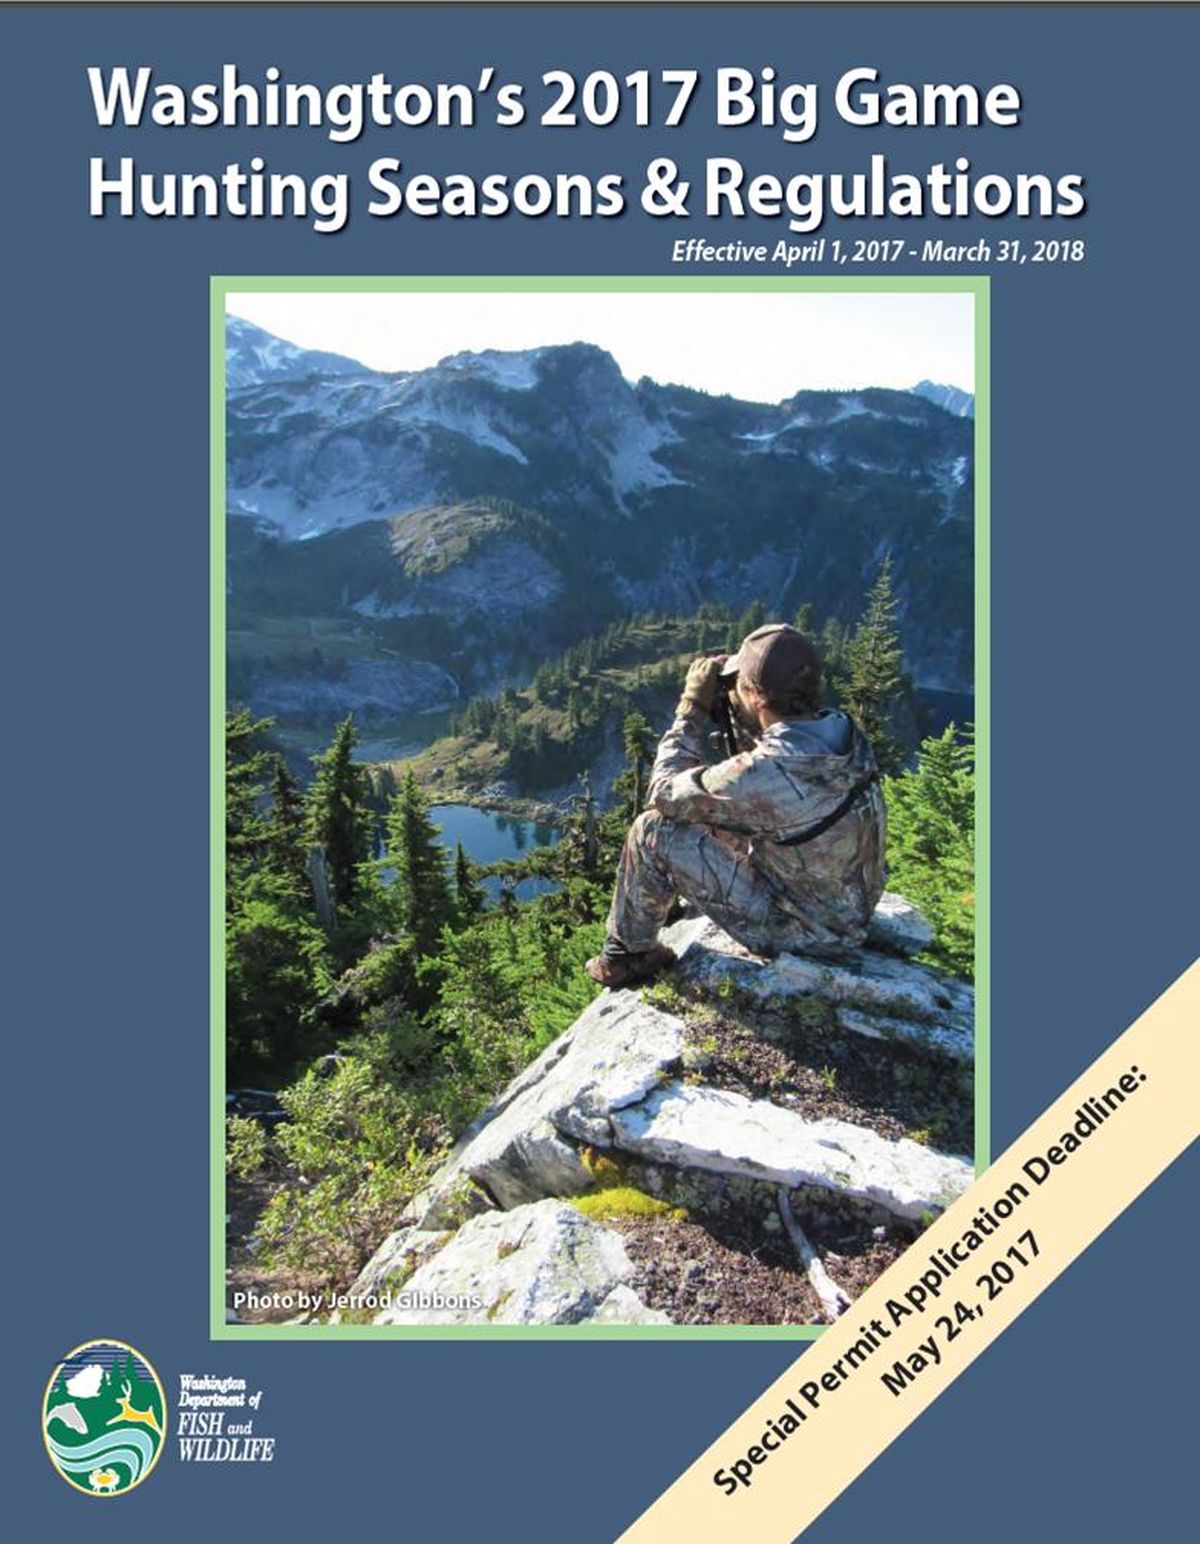 Washington's 2017 Hunting Regulations Pamphlet posted online The